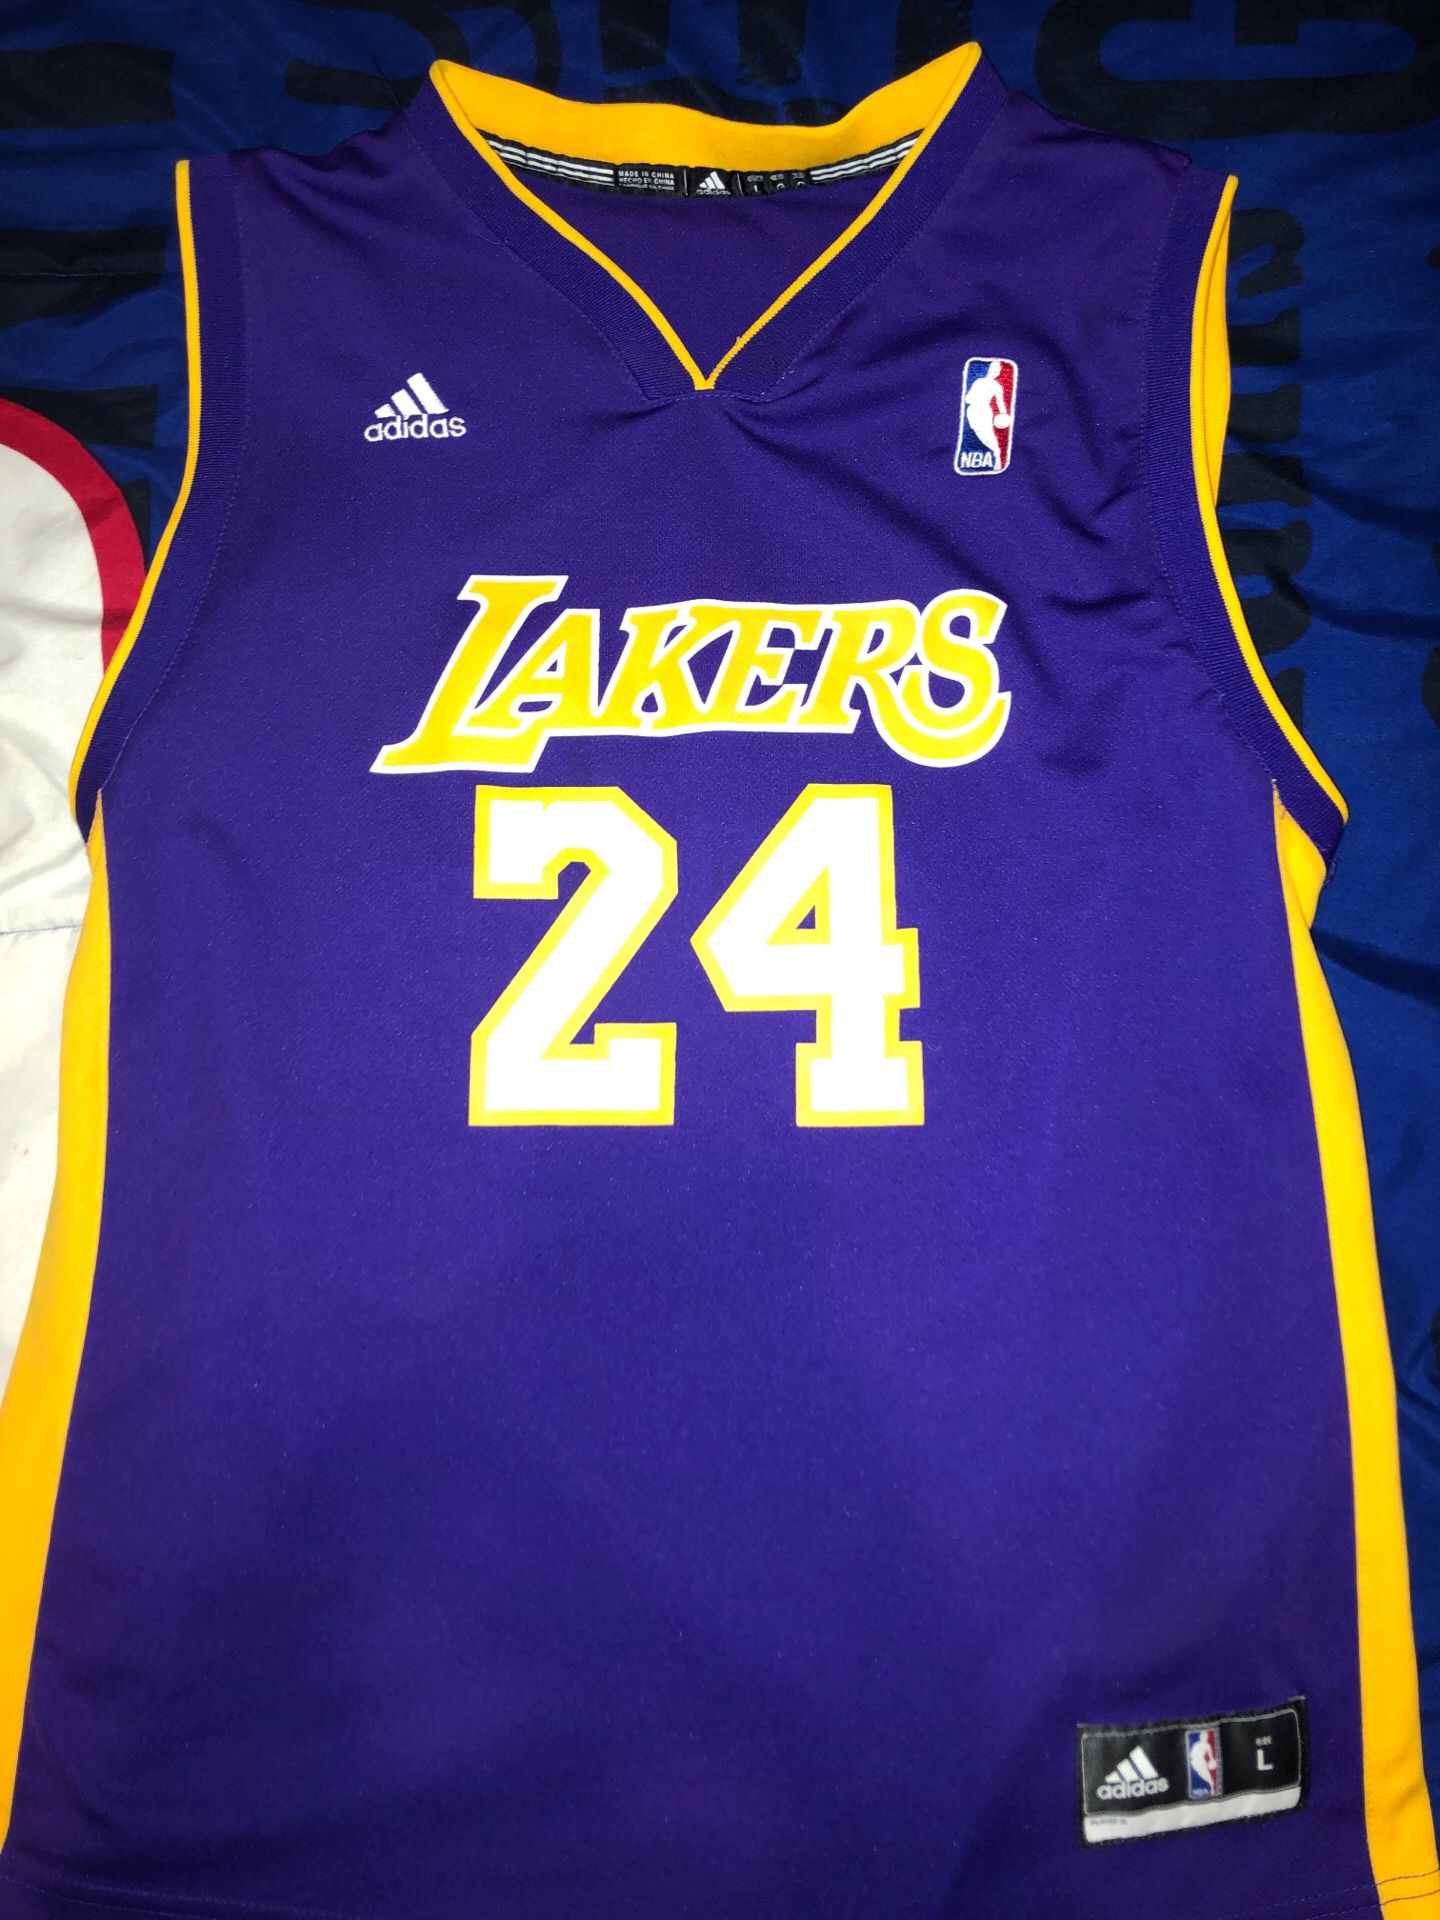 2003 Kobe Bryant Jersey Authentic for Sale in Buena Park, CA - OfferUp